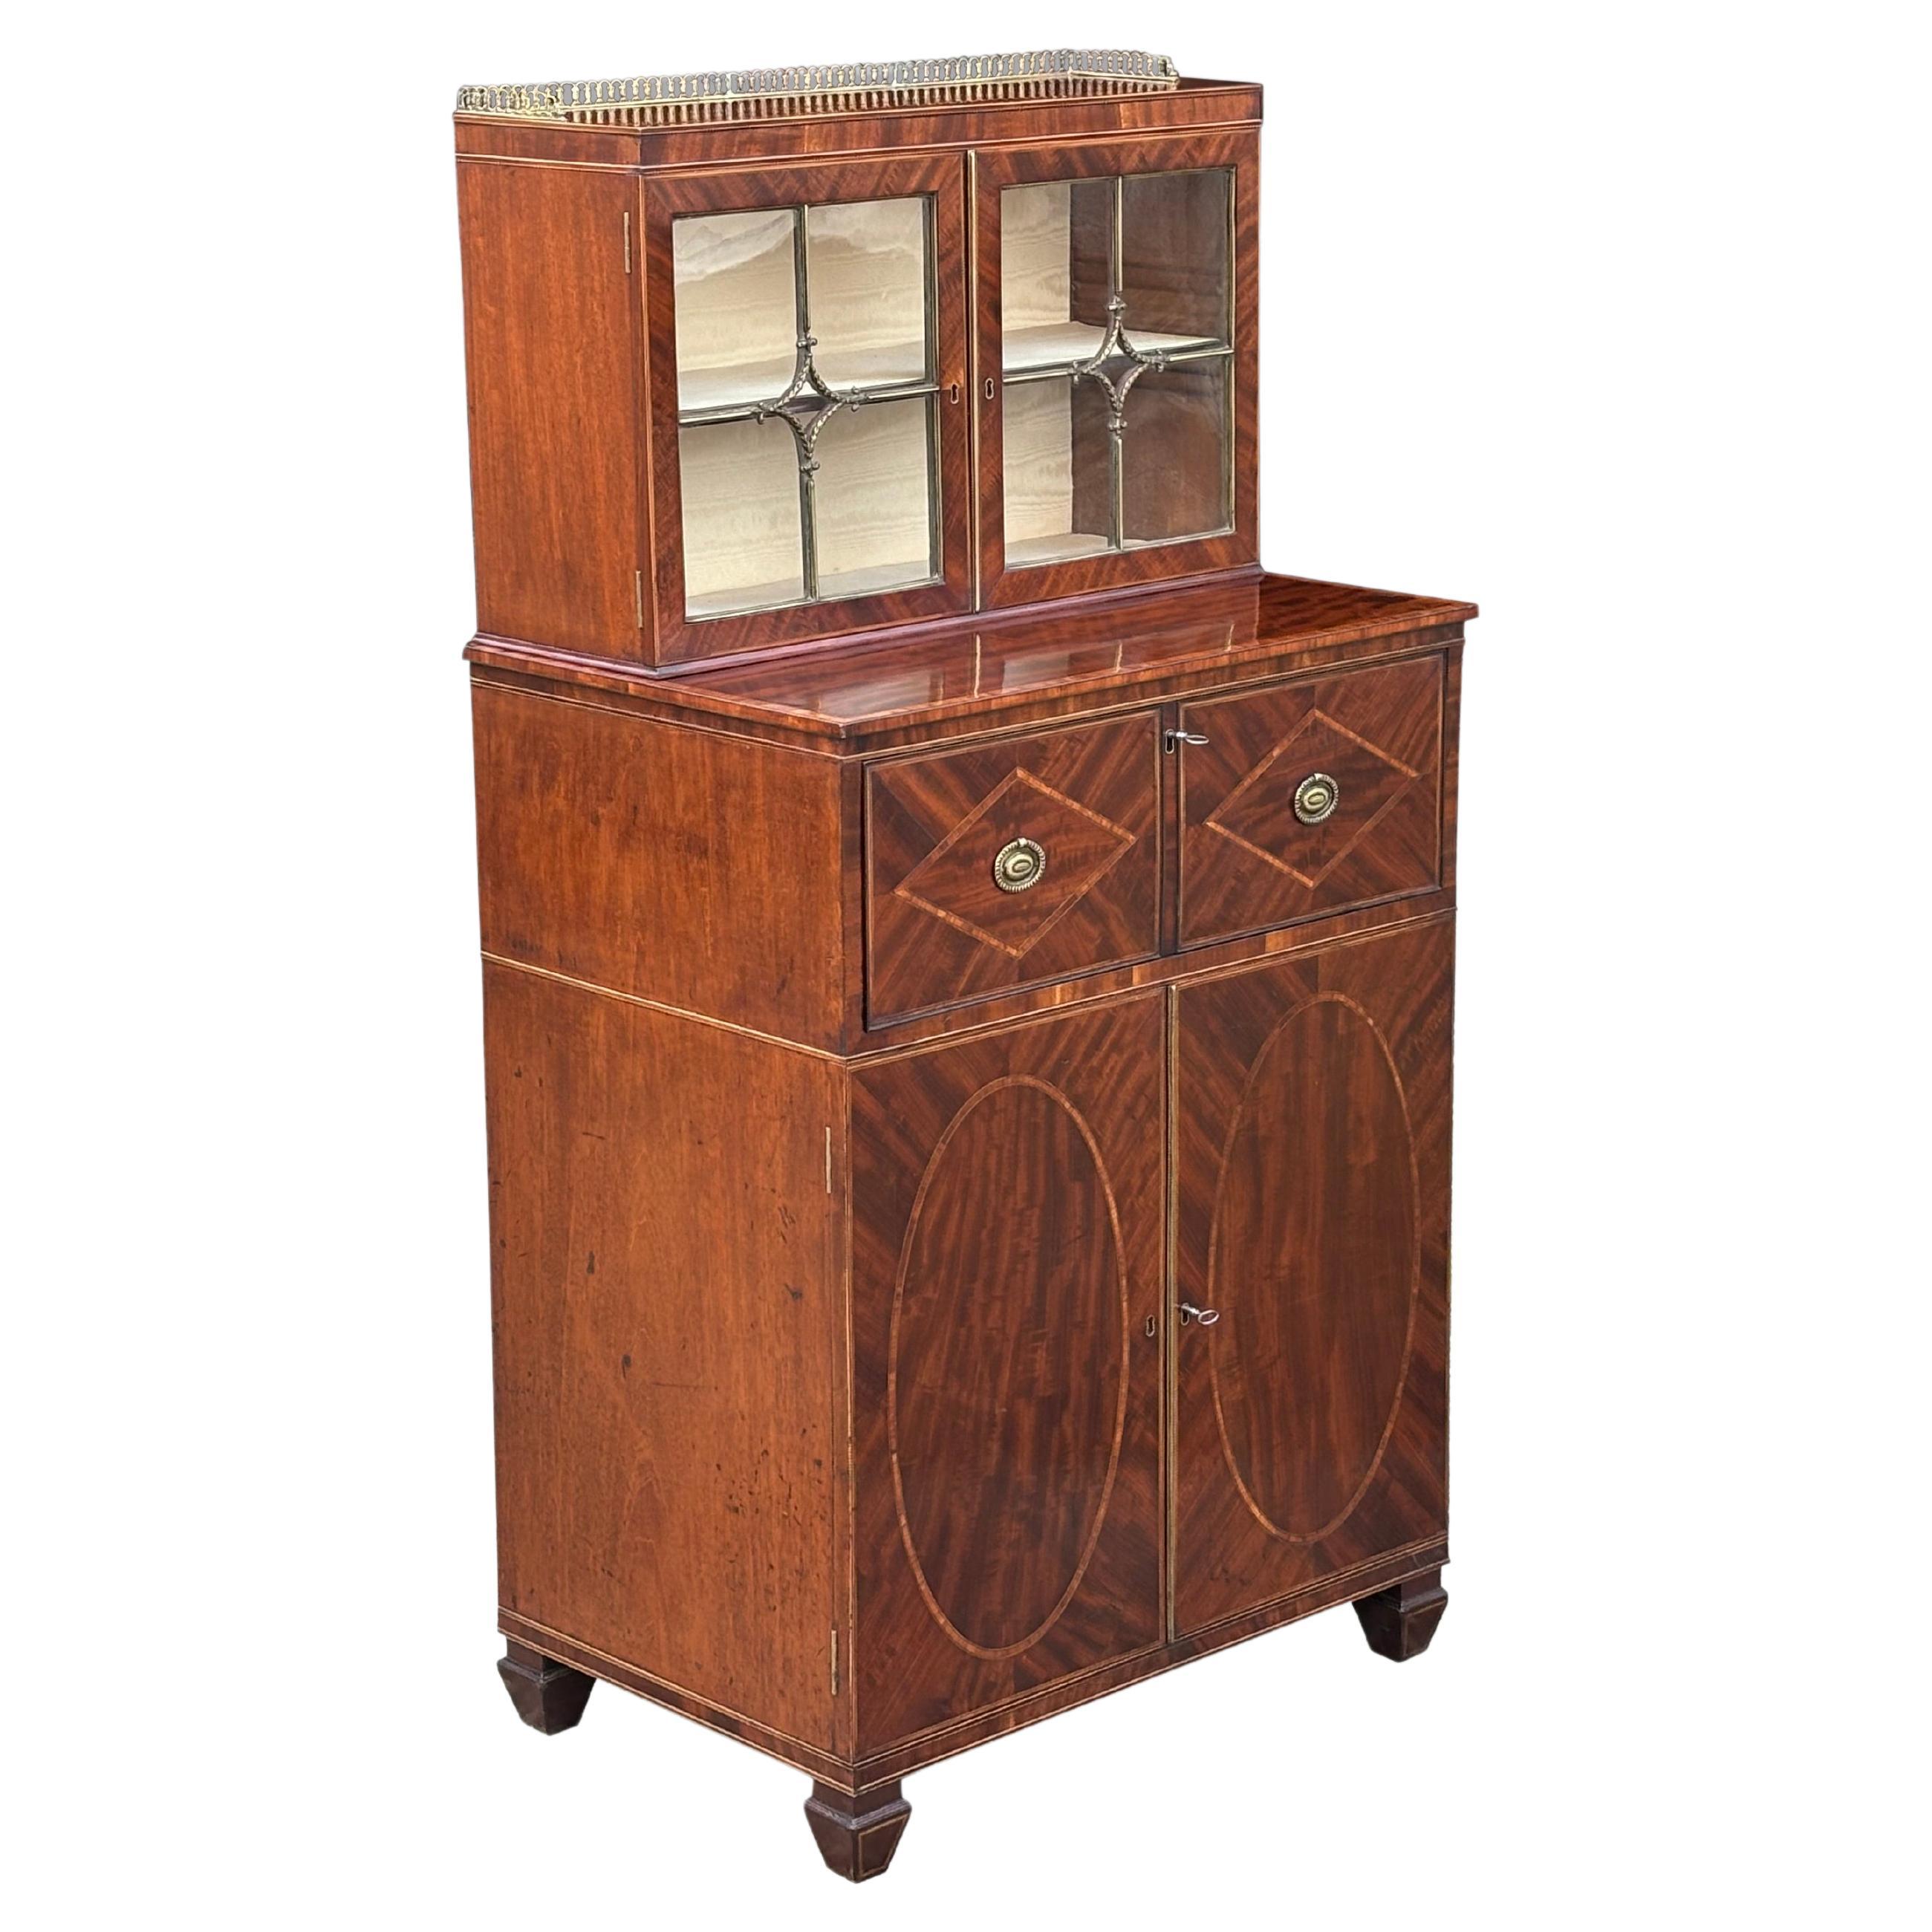 Early 19th Century Regency Period Mahogany Secretaire Bookcase For Sale